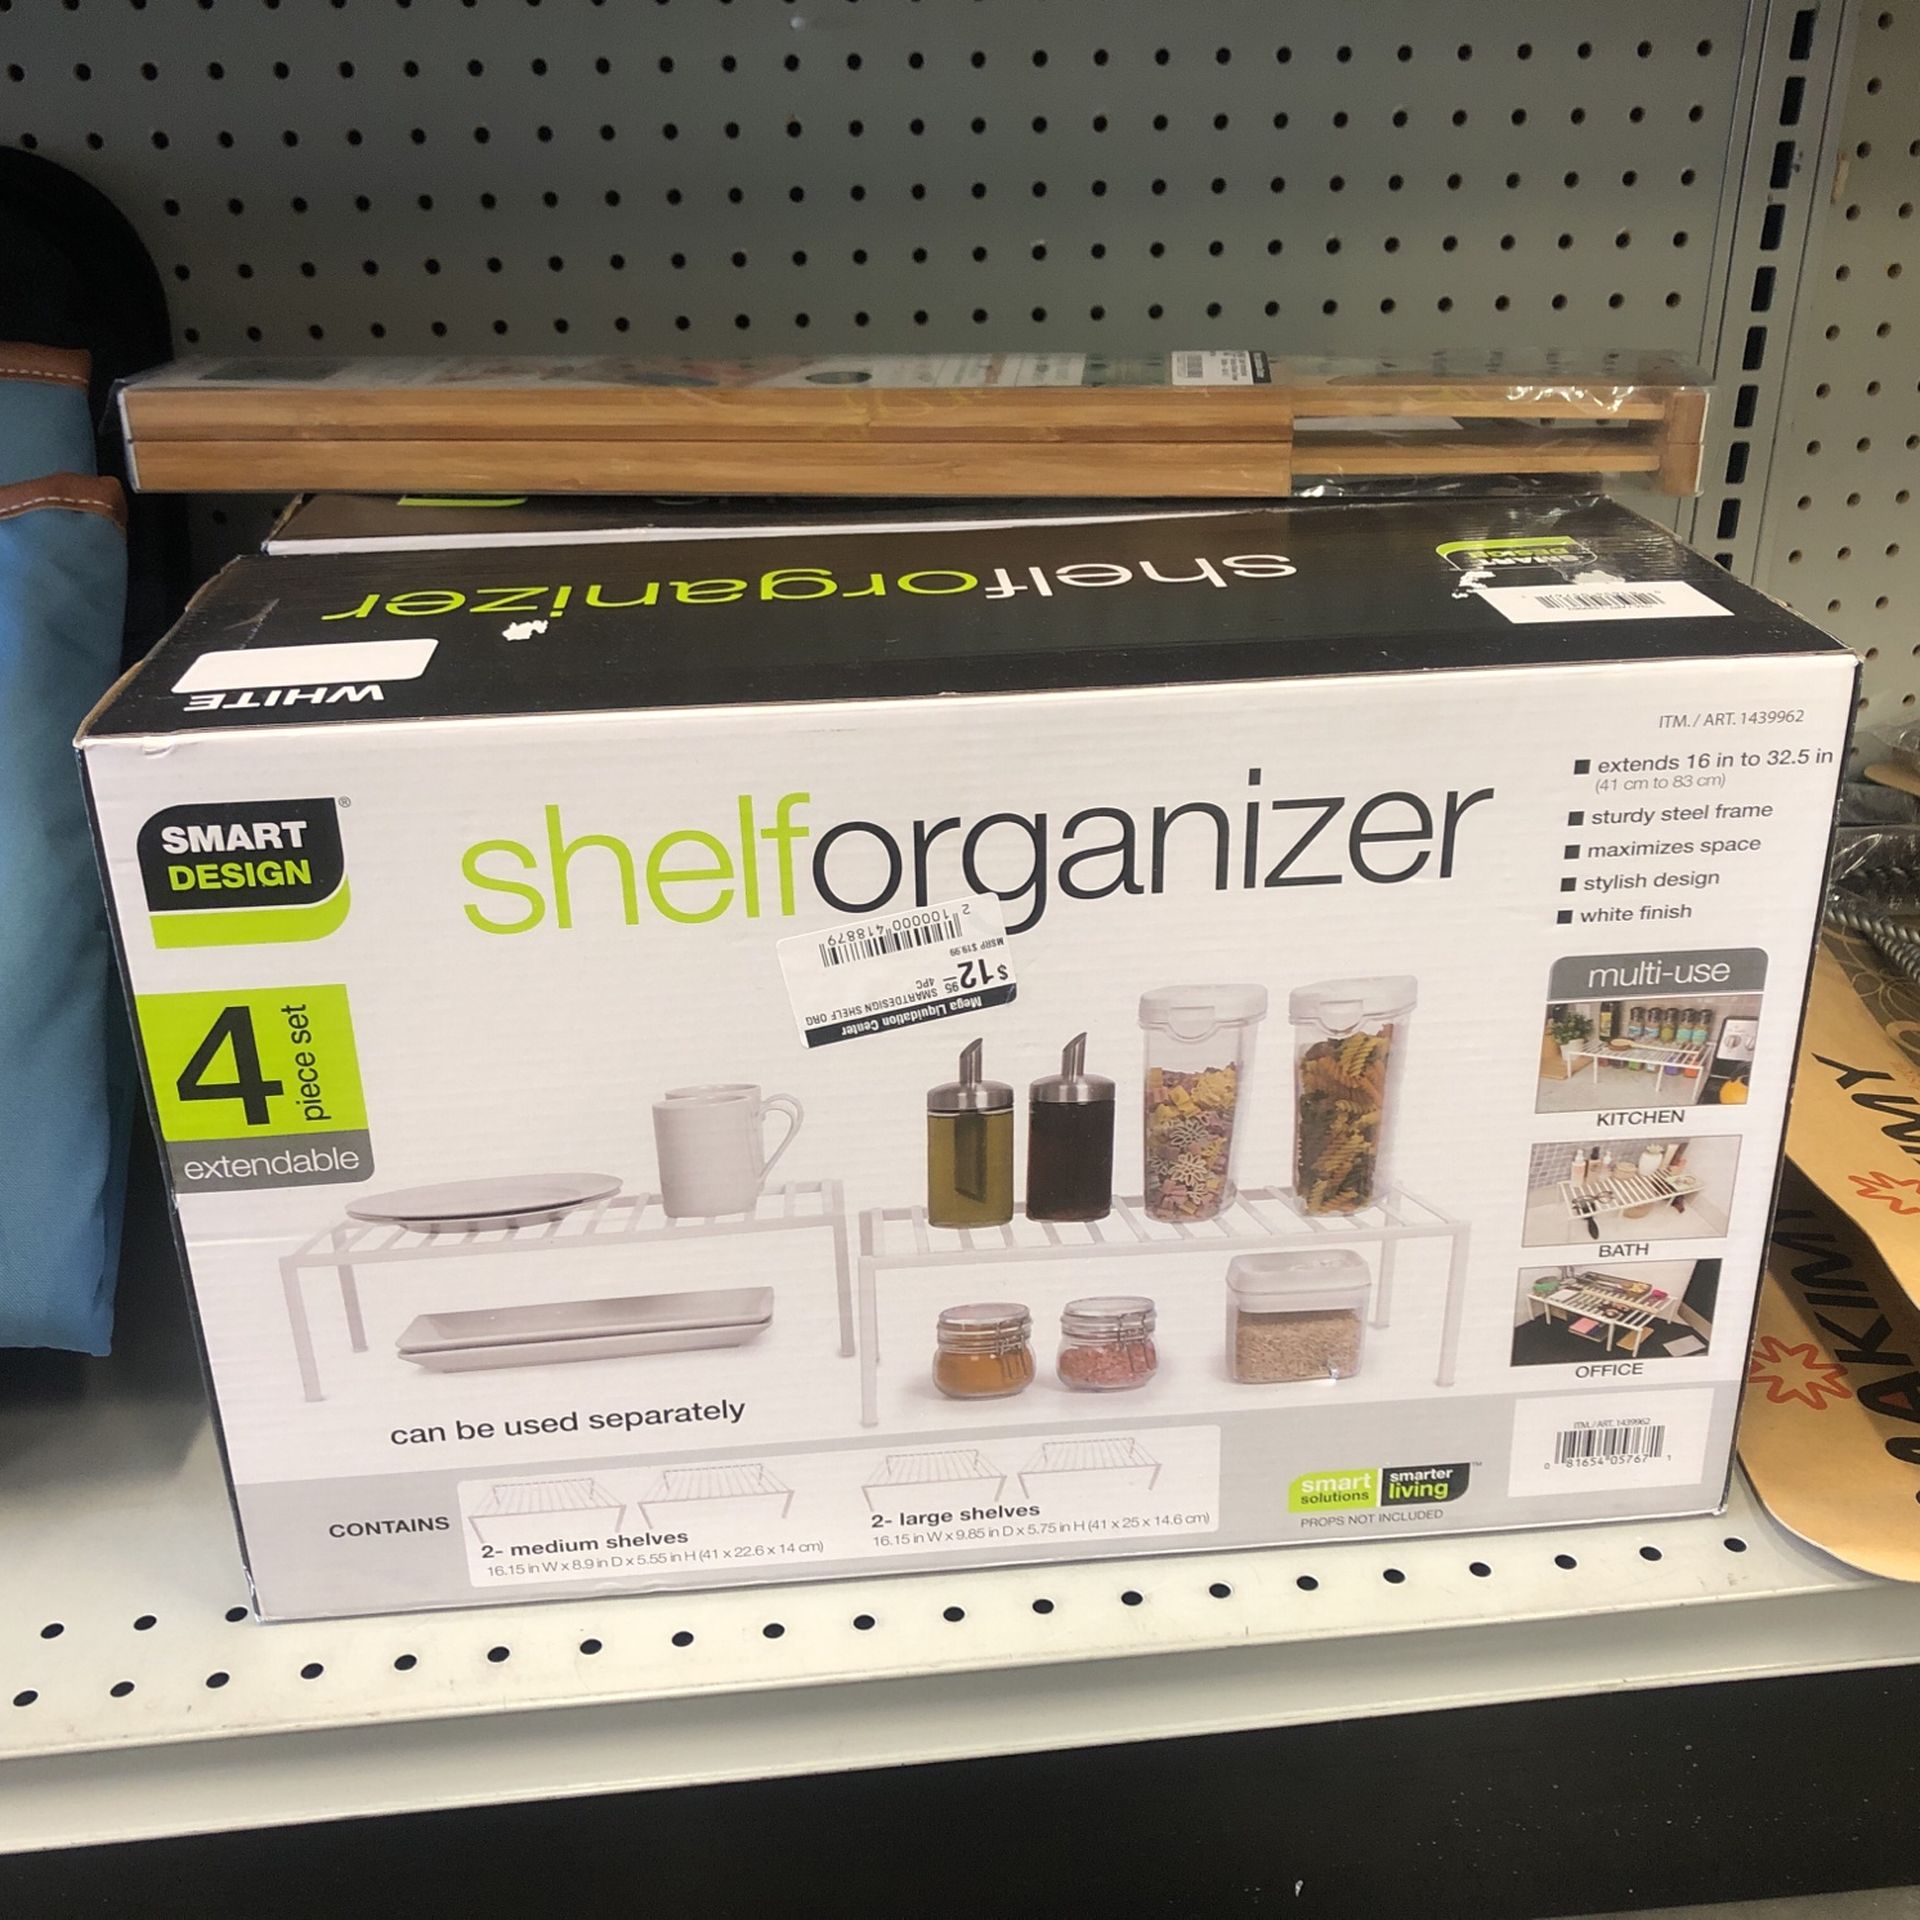 Shelf organizer… Follow our profile for the best info